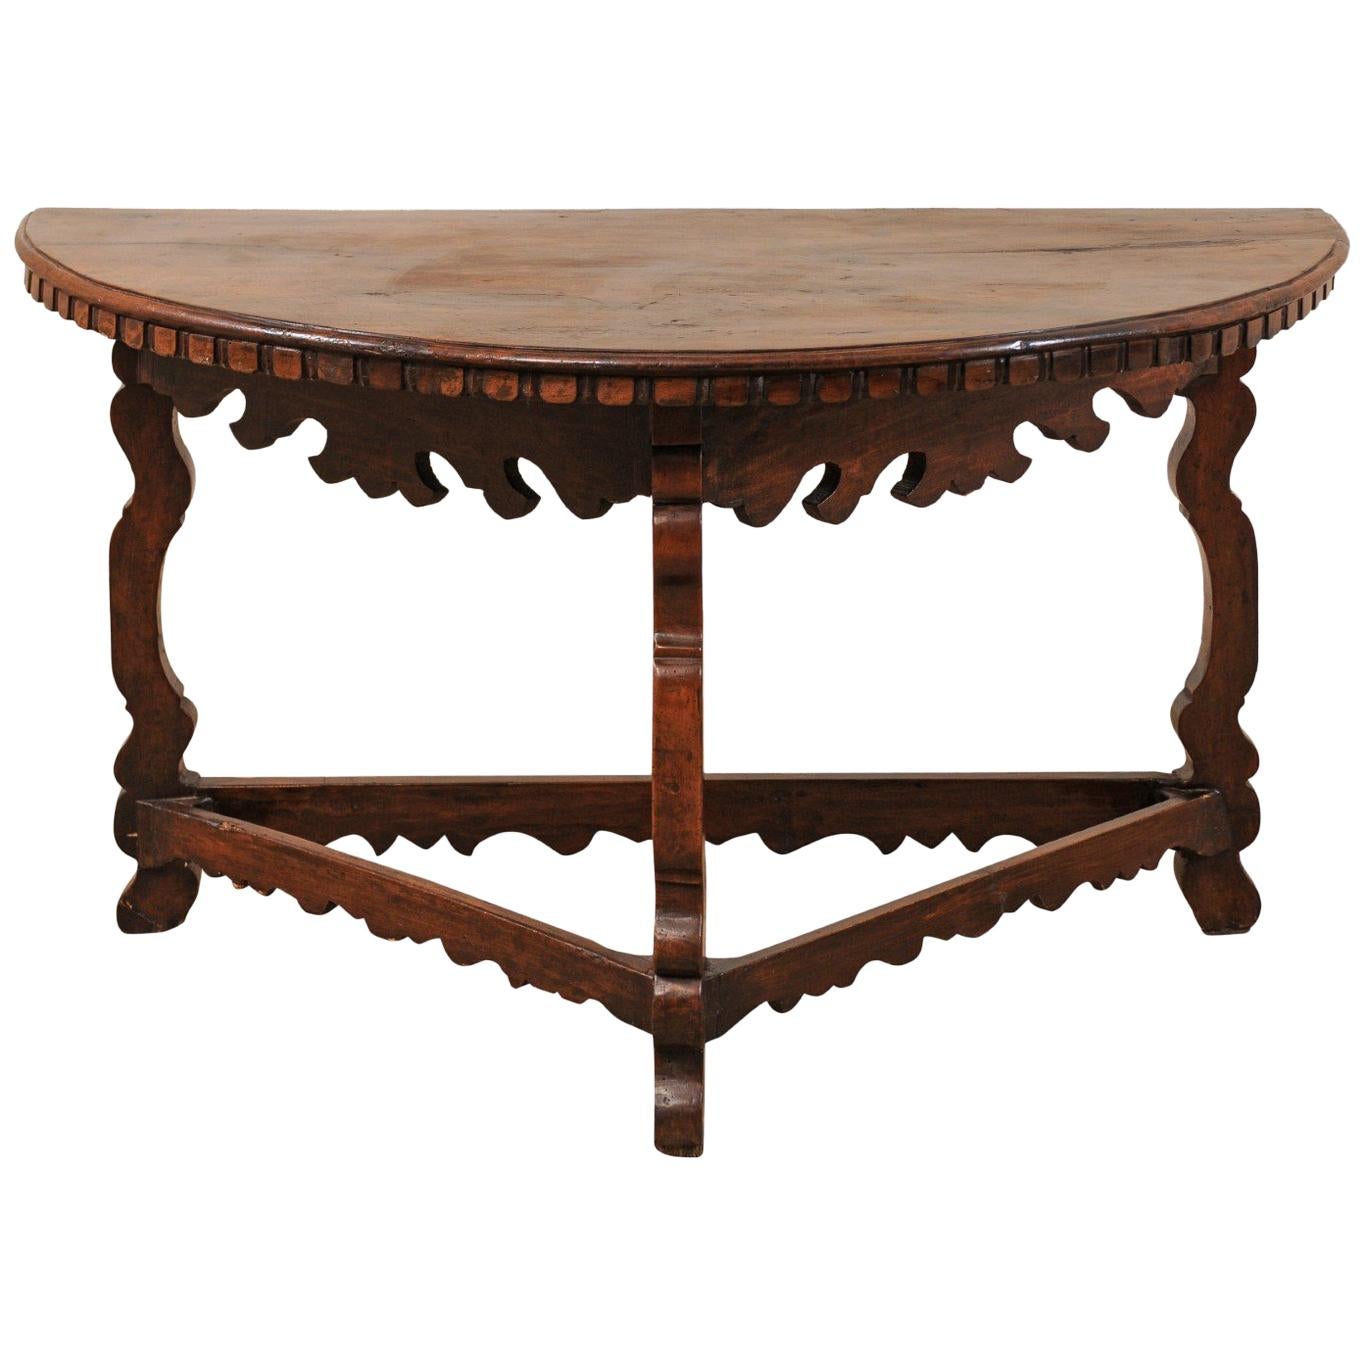 Handsome 18th Century Italian Carved Walnut Wood Demilune Table